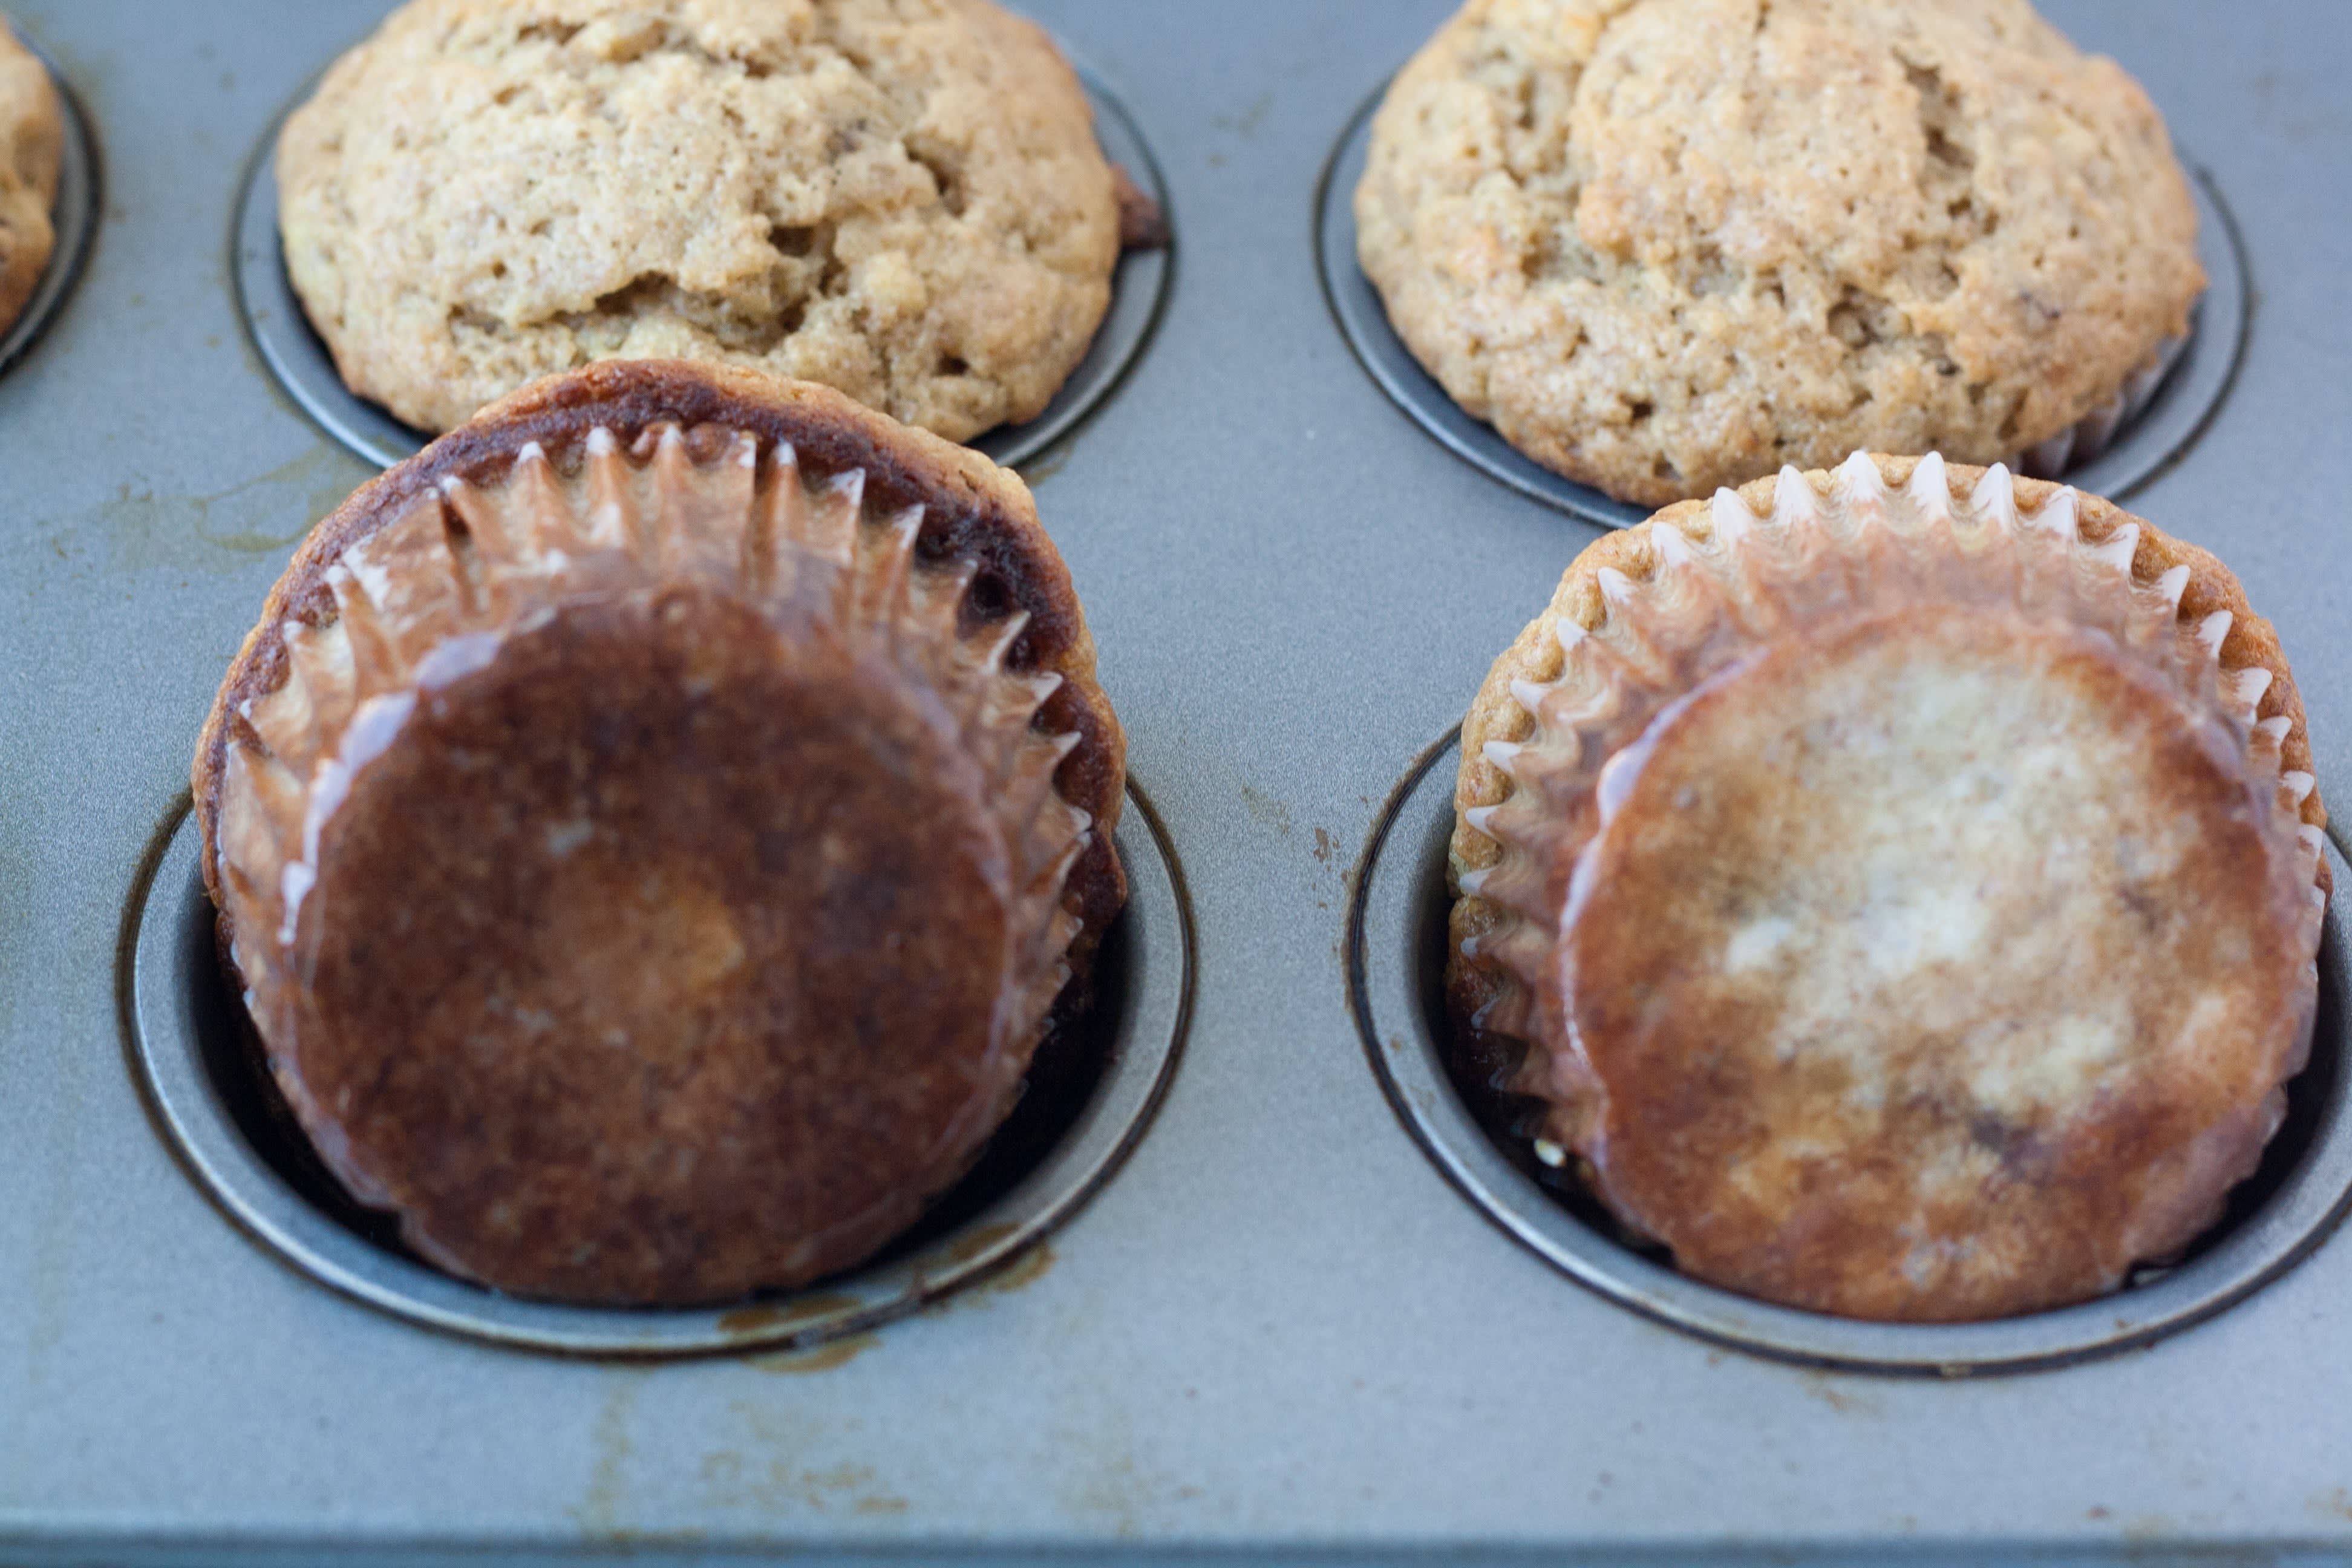 7 Reasons You Should Never Use Muffin Liners